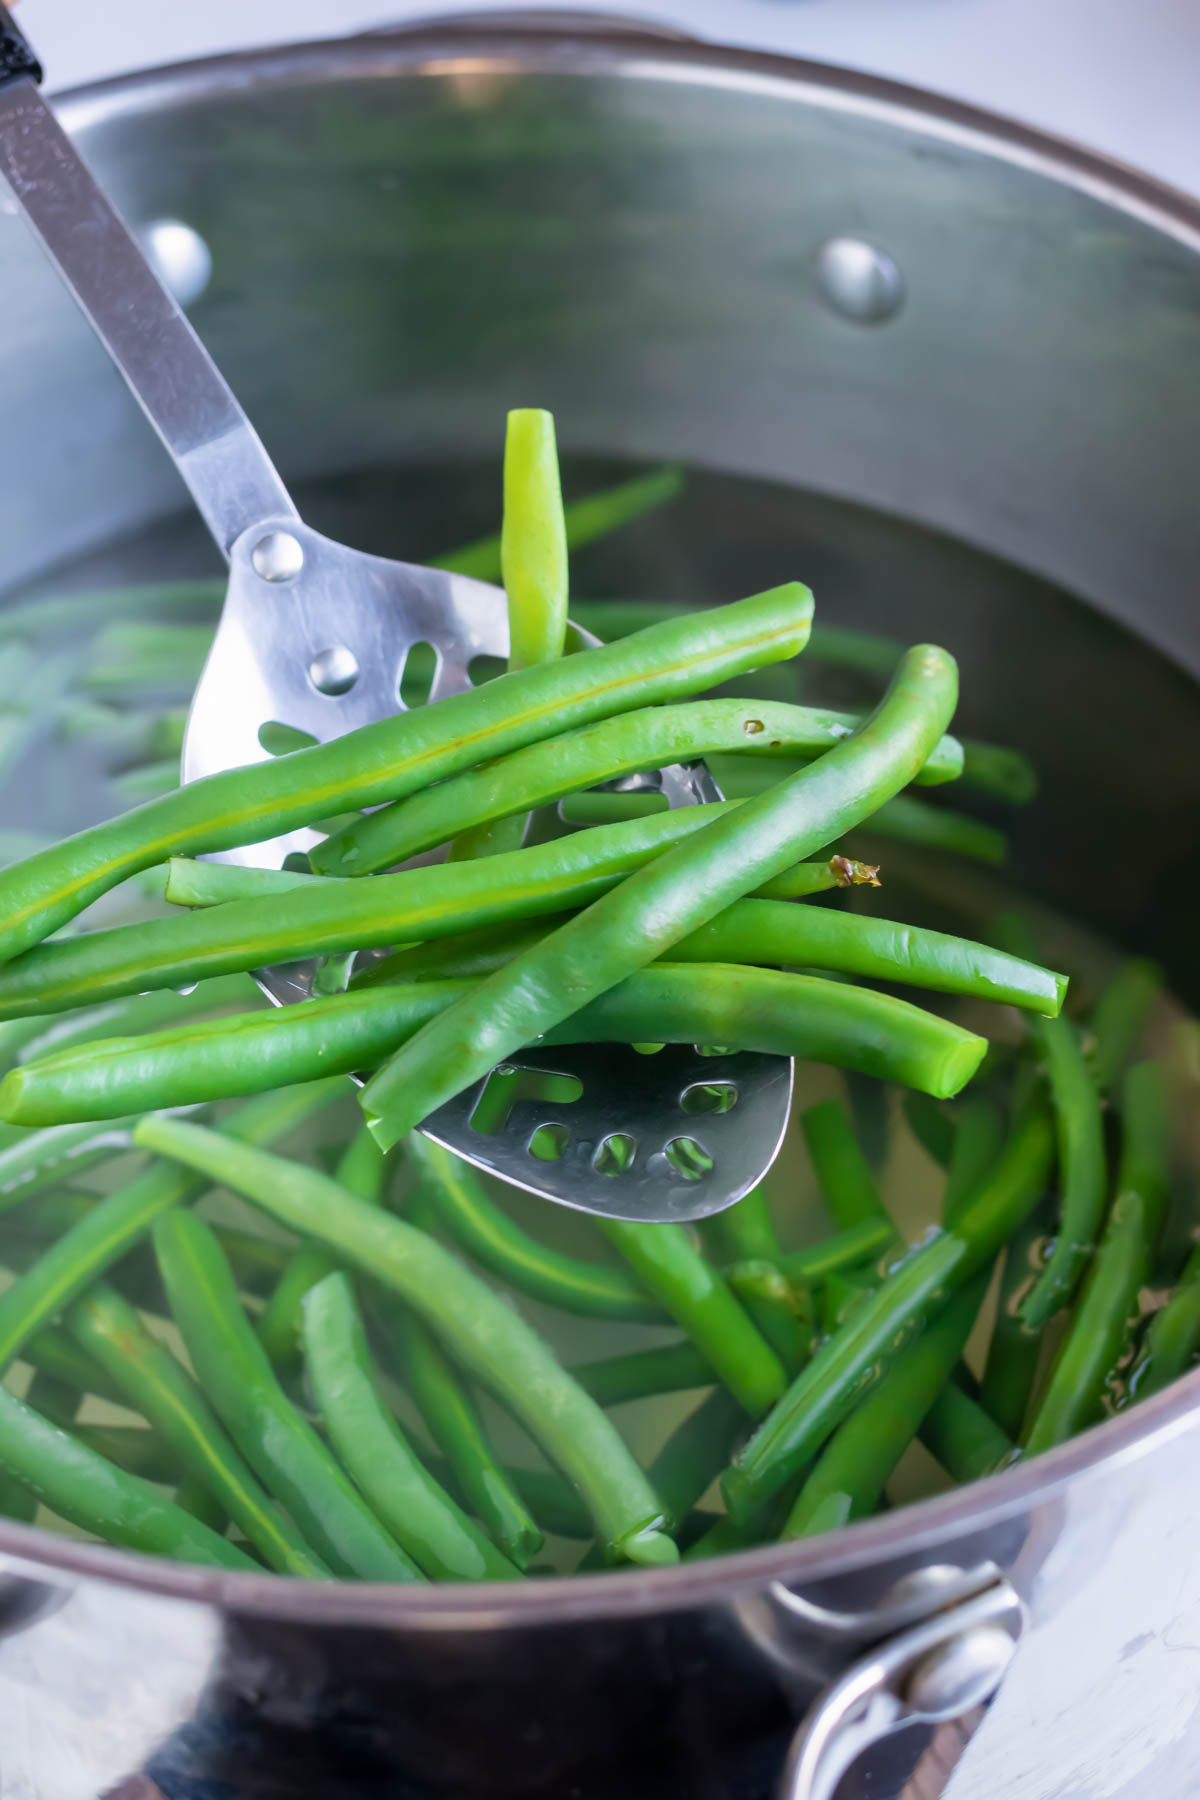 Boiled green beans being pulled out of a pot with a slotted spoon.